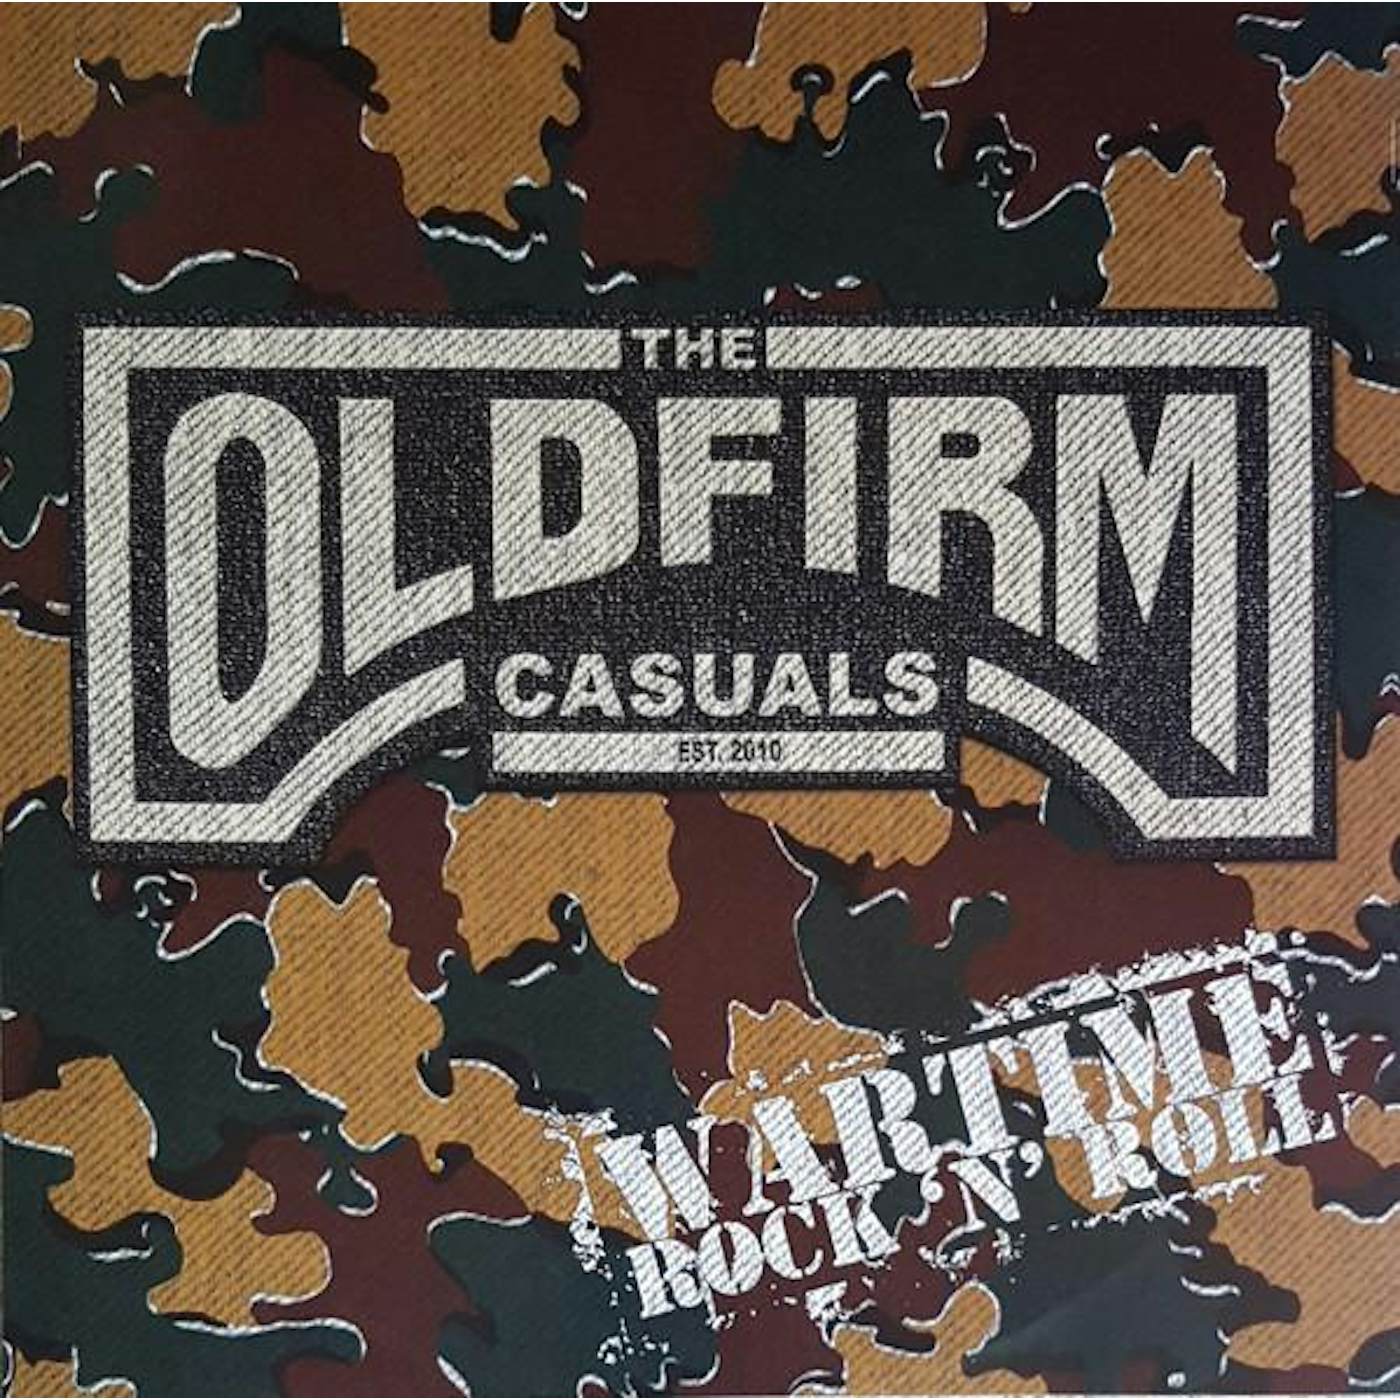 The Old Firm Casuals WARTIME ROCK'N'ROLL Vinyl Record